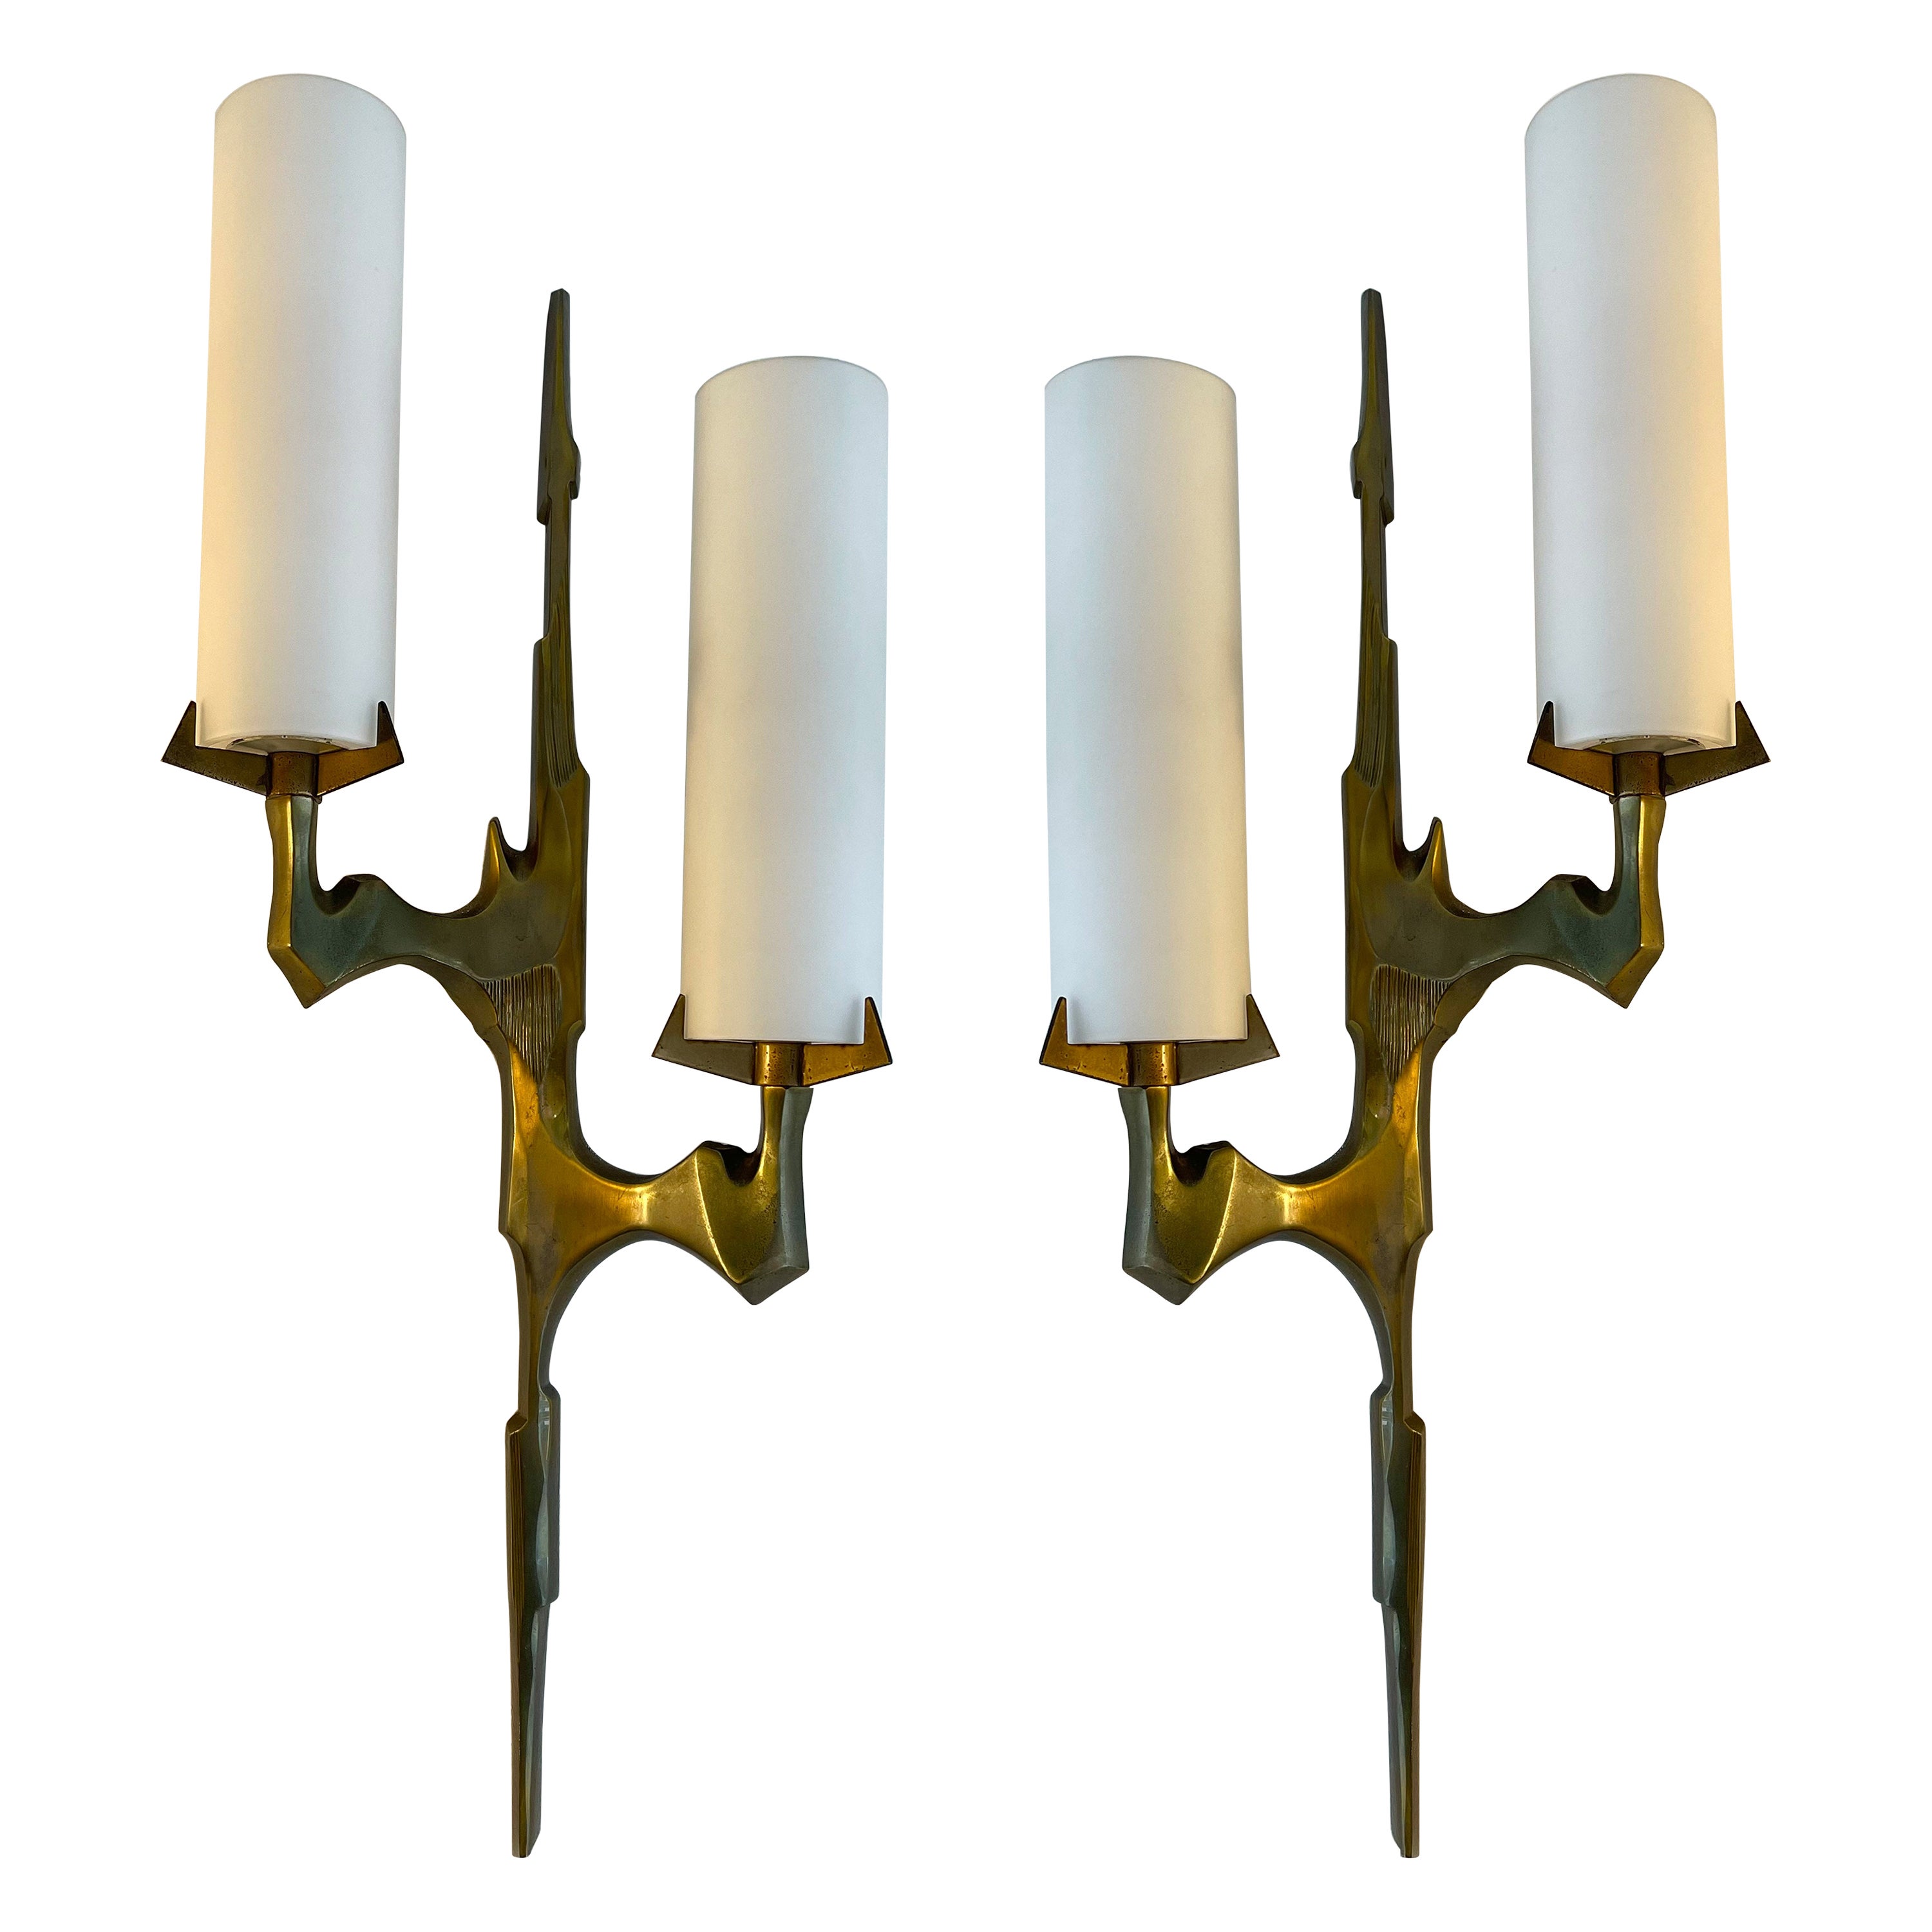 Pair of Gilt Bronze and Opaline Glass Sconces by Maison Arlus, France, 1960s